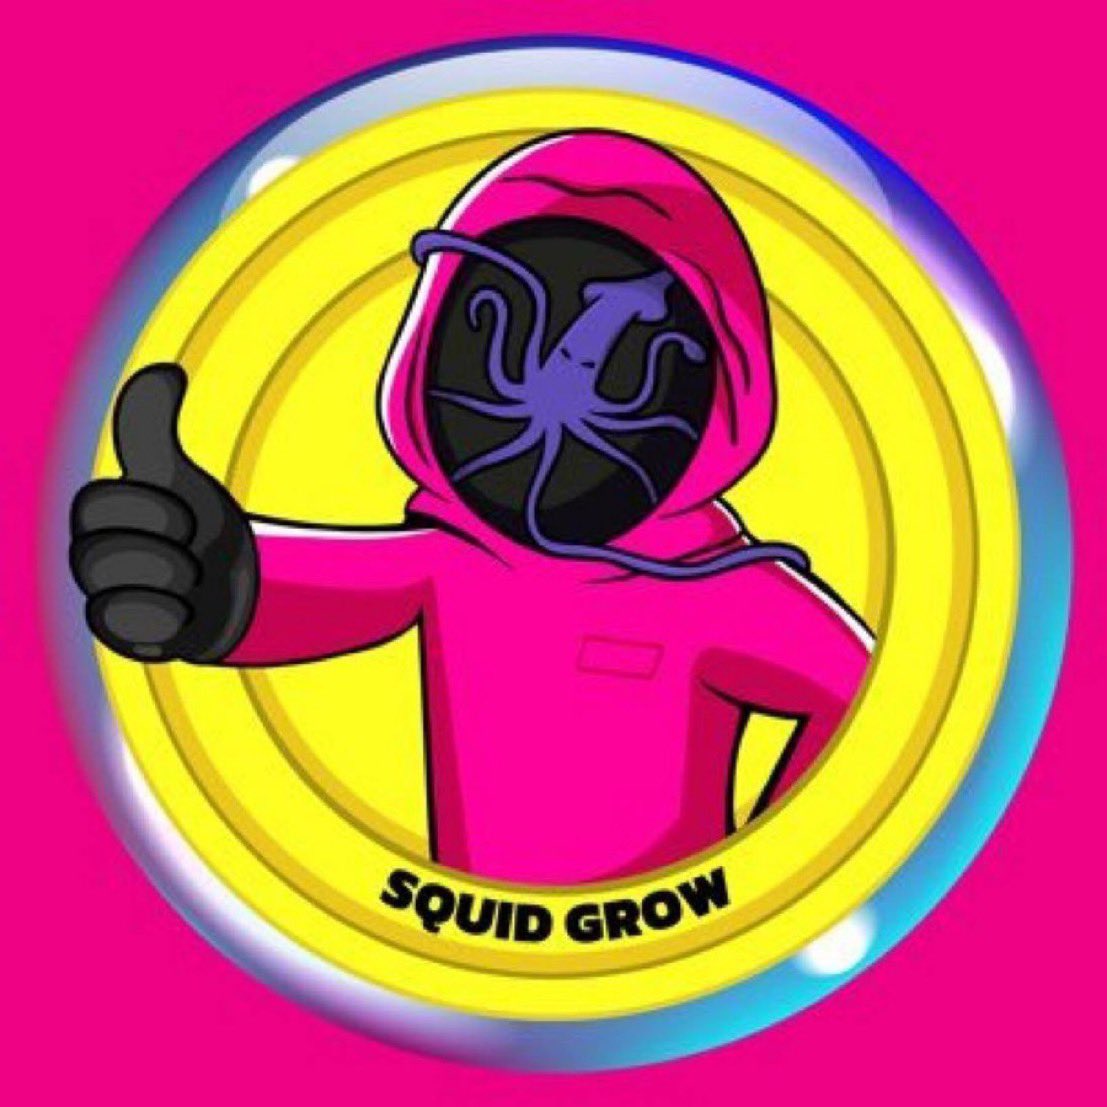 #SquidGrow is destined for Billions